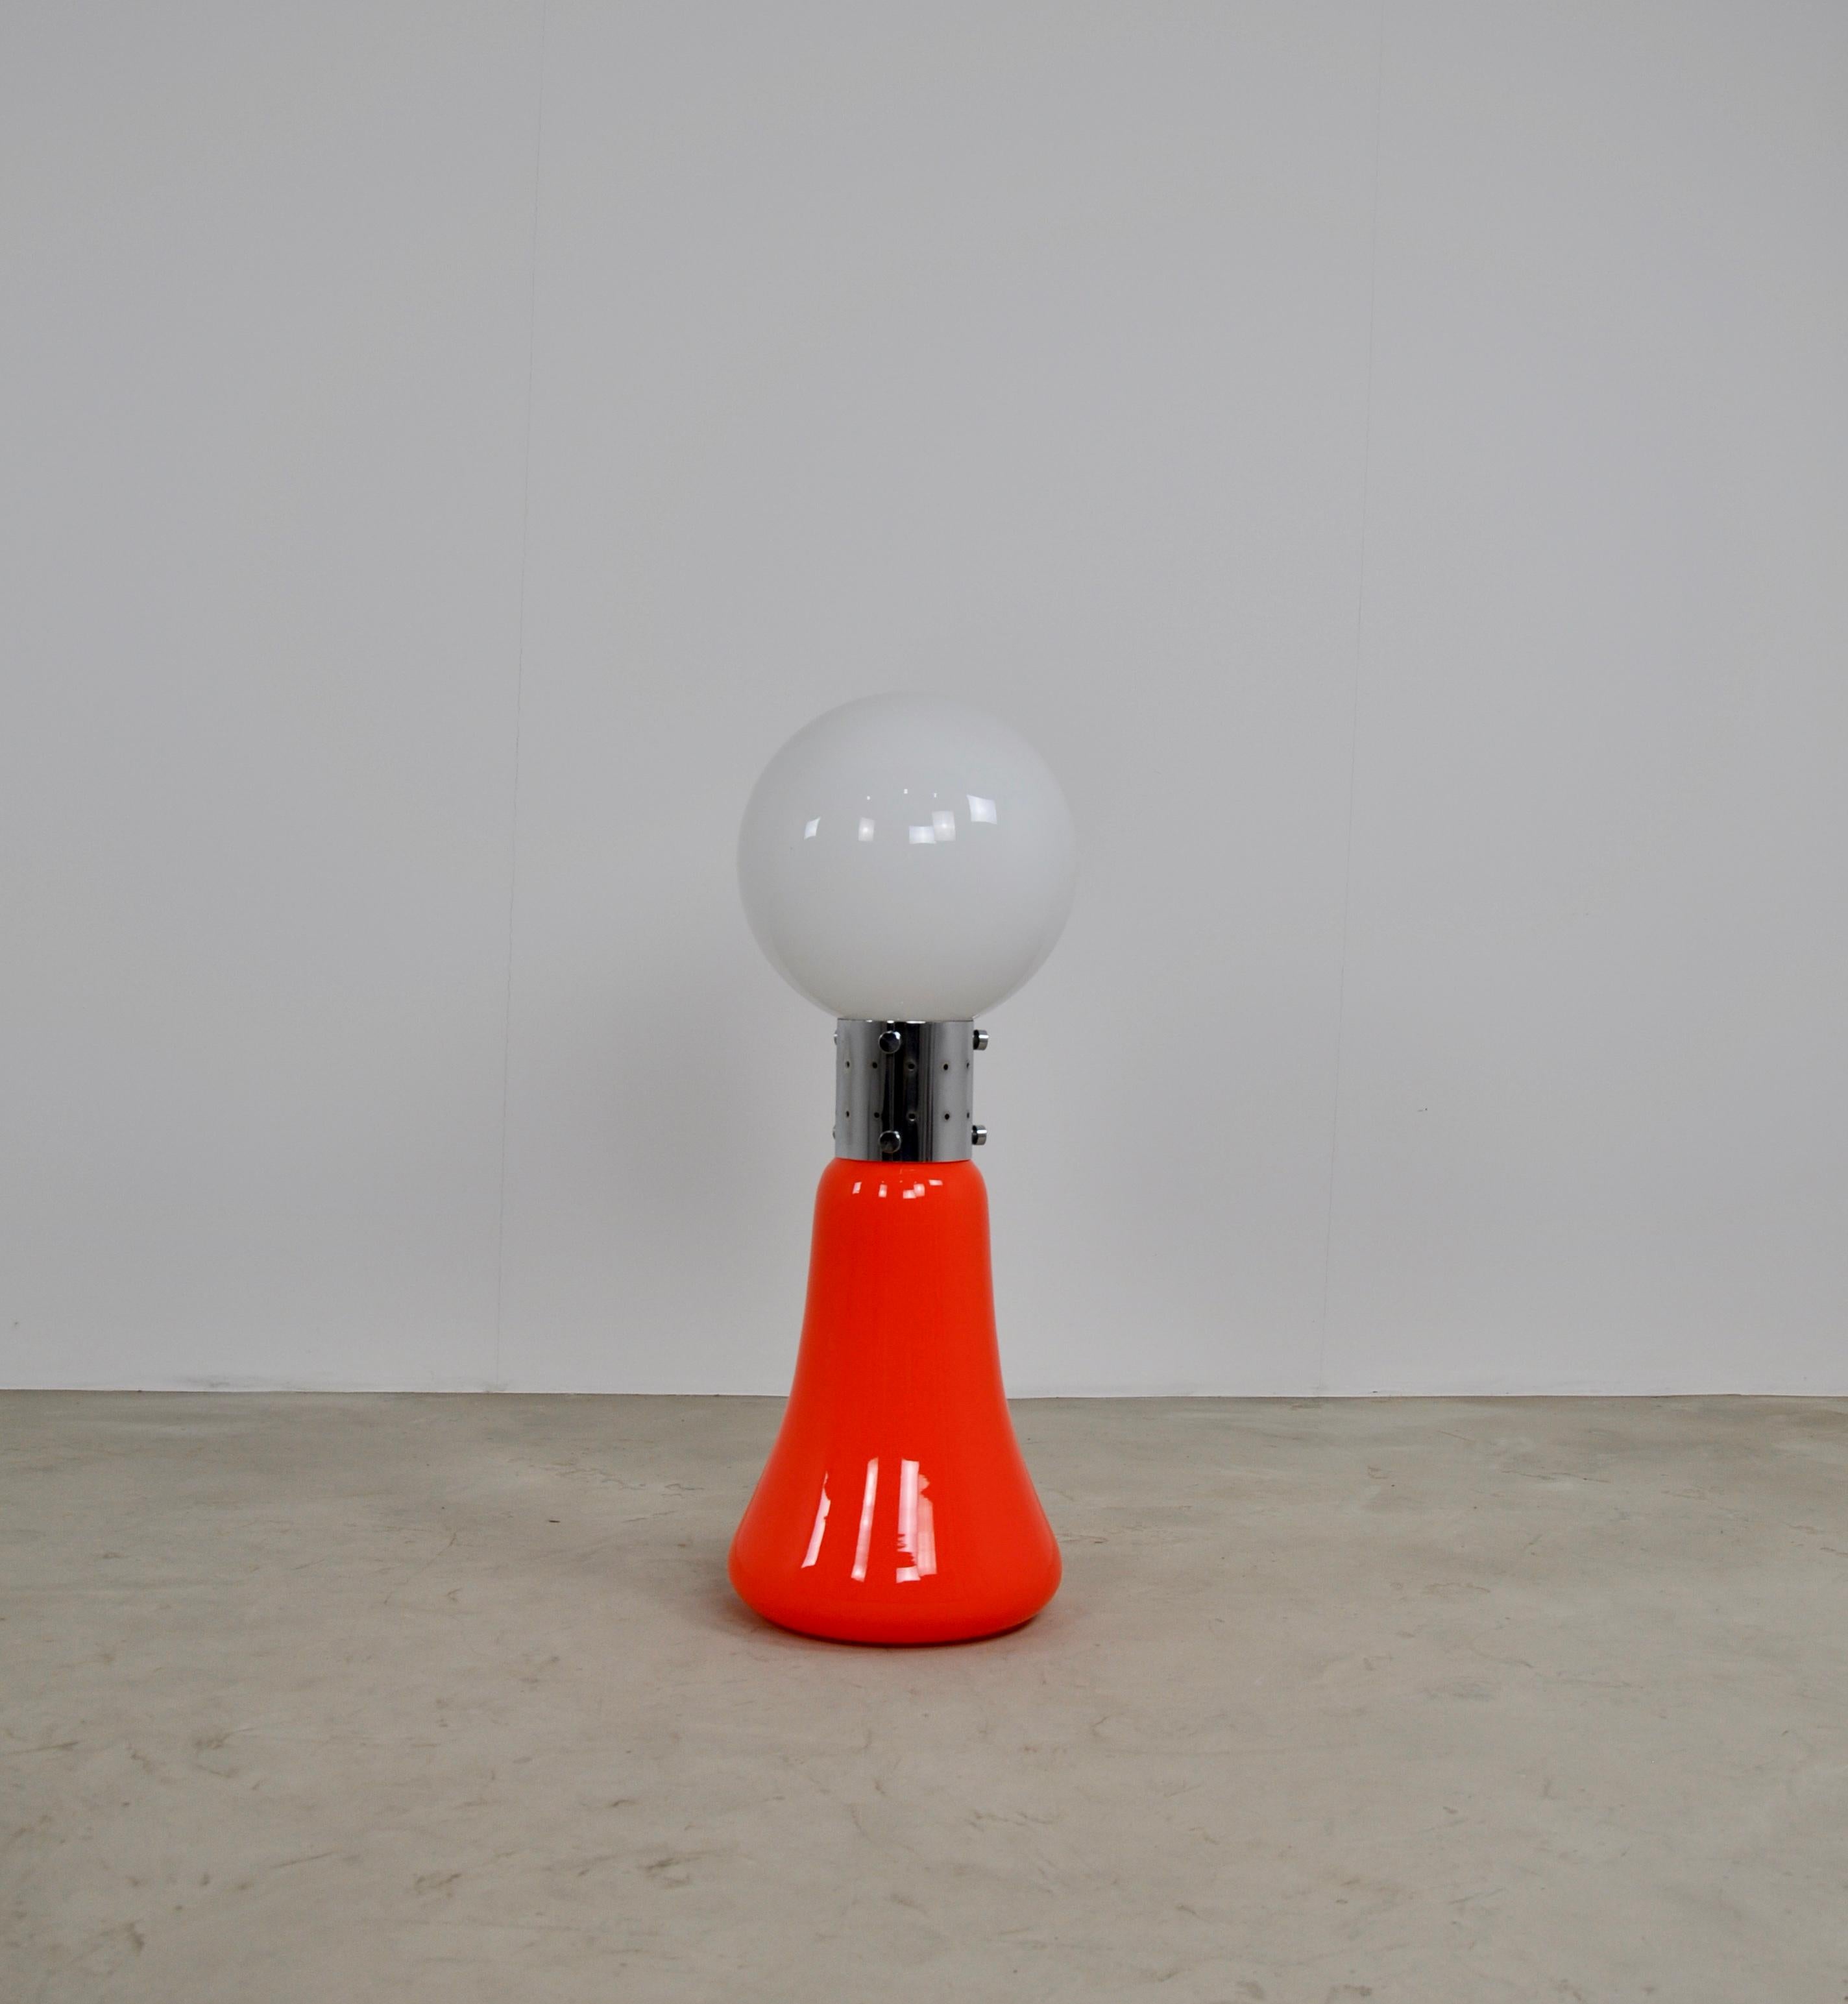 Floor lamp in Murano glass, orange and white color. Wear due to the time and the age of the lamp.